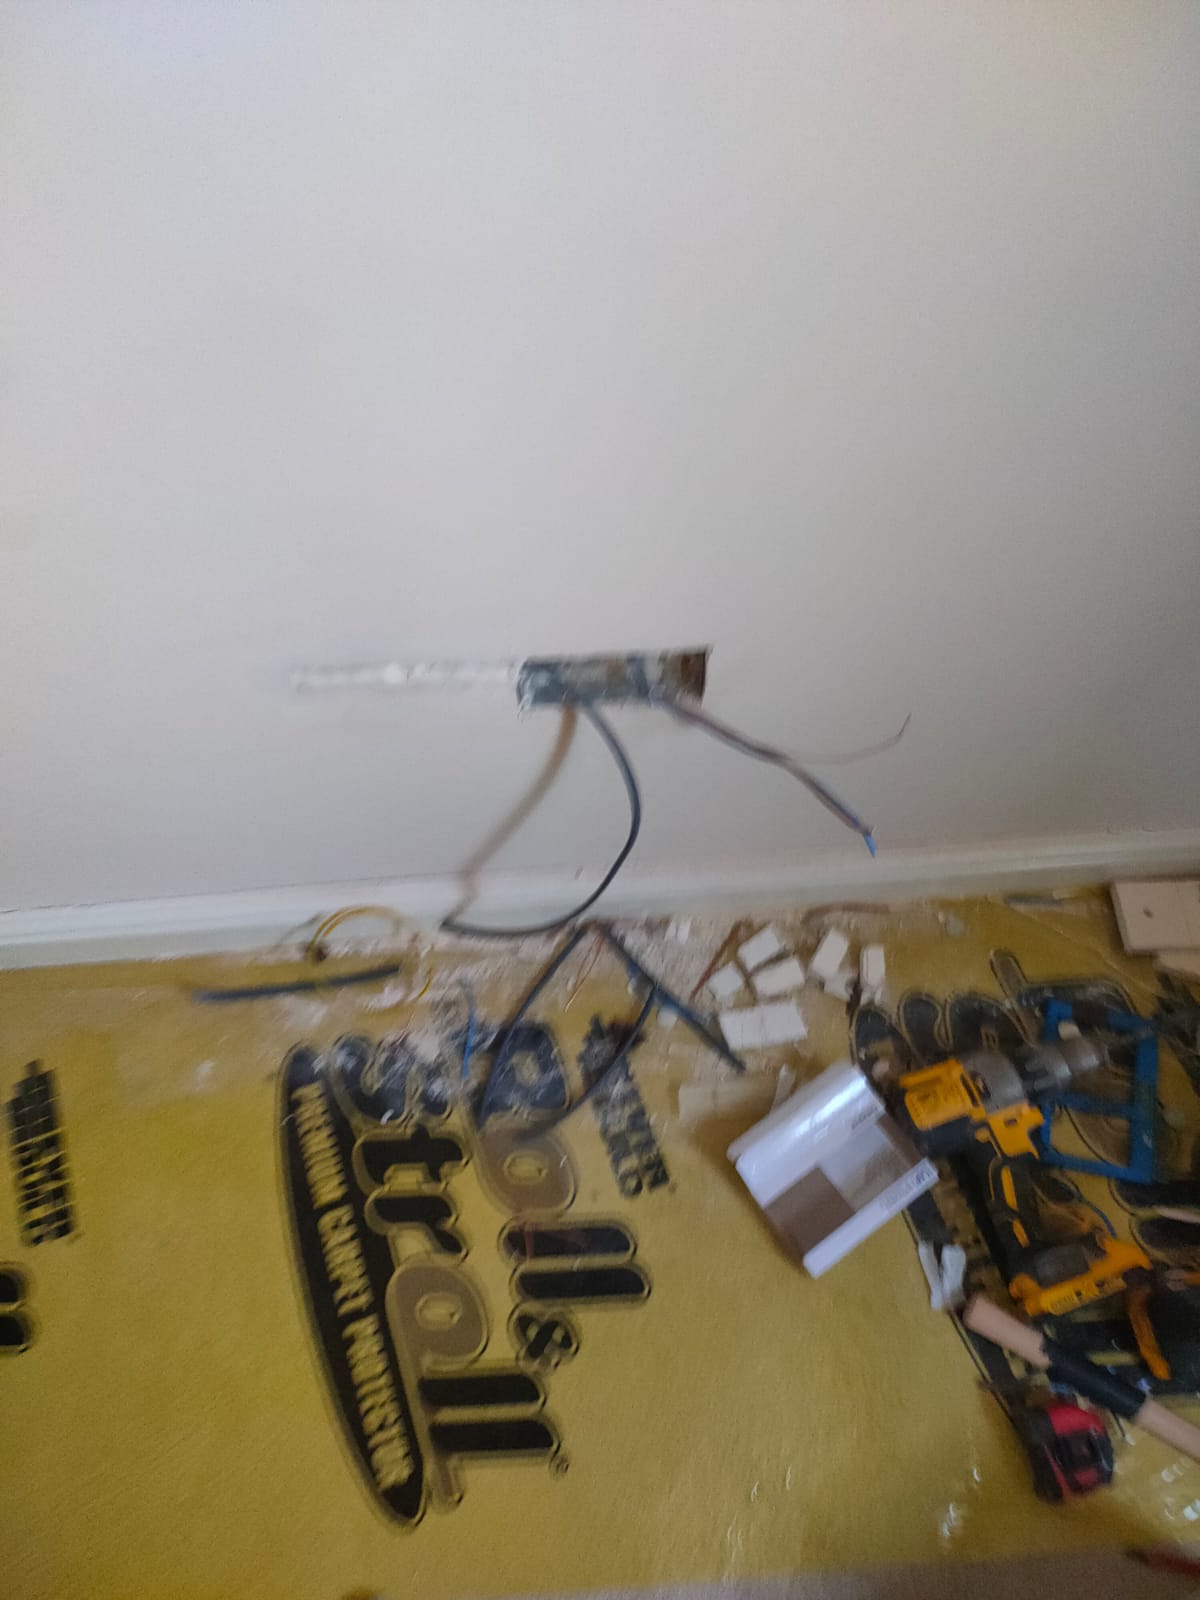 A socket installed on a wall, unfortunatly its a blurry photo but below is some material for protection